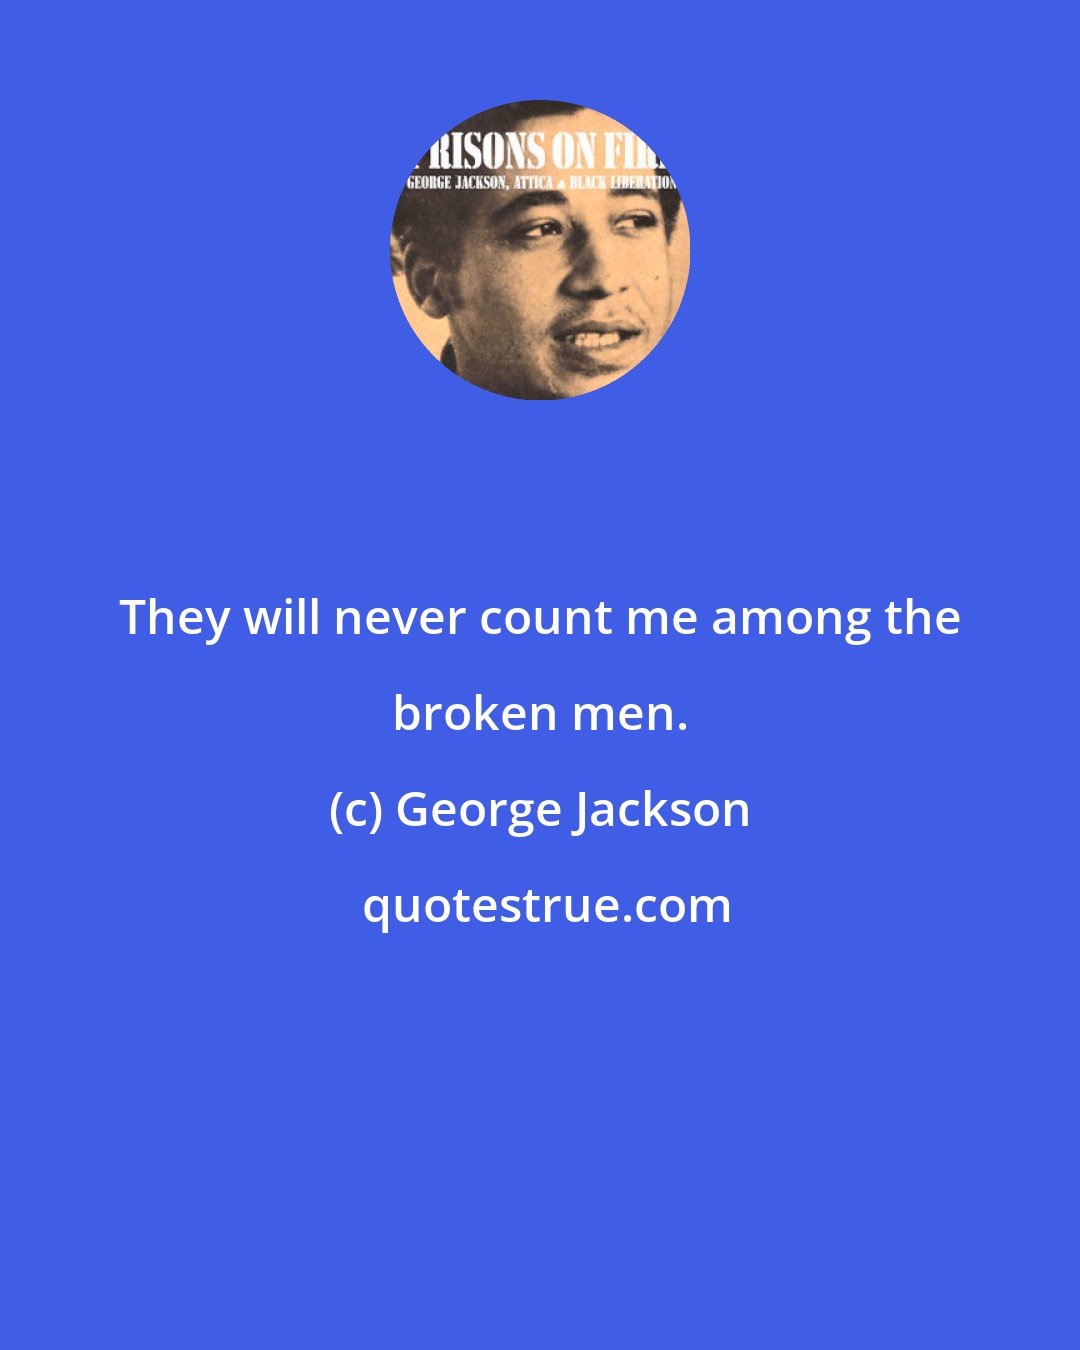 George Jackson: They will never count me among the broken men.